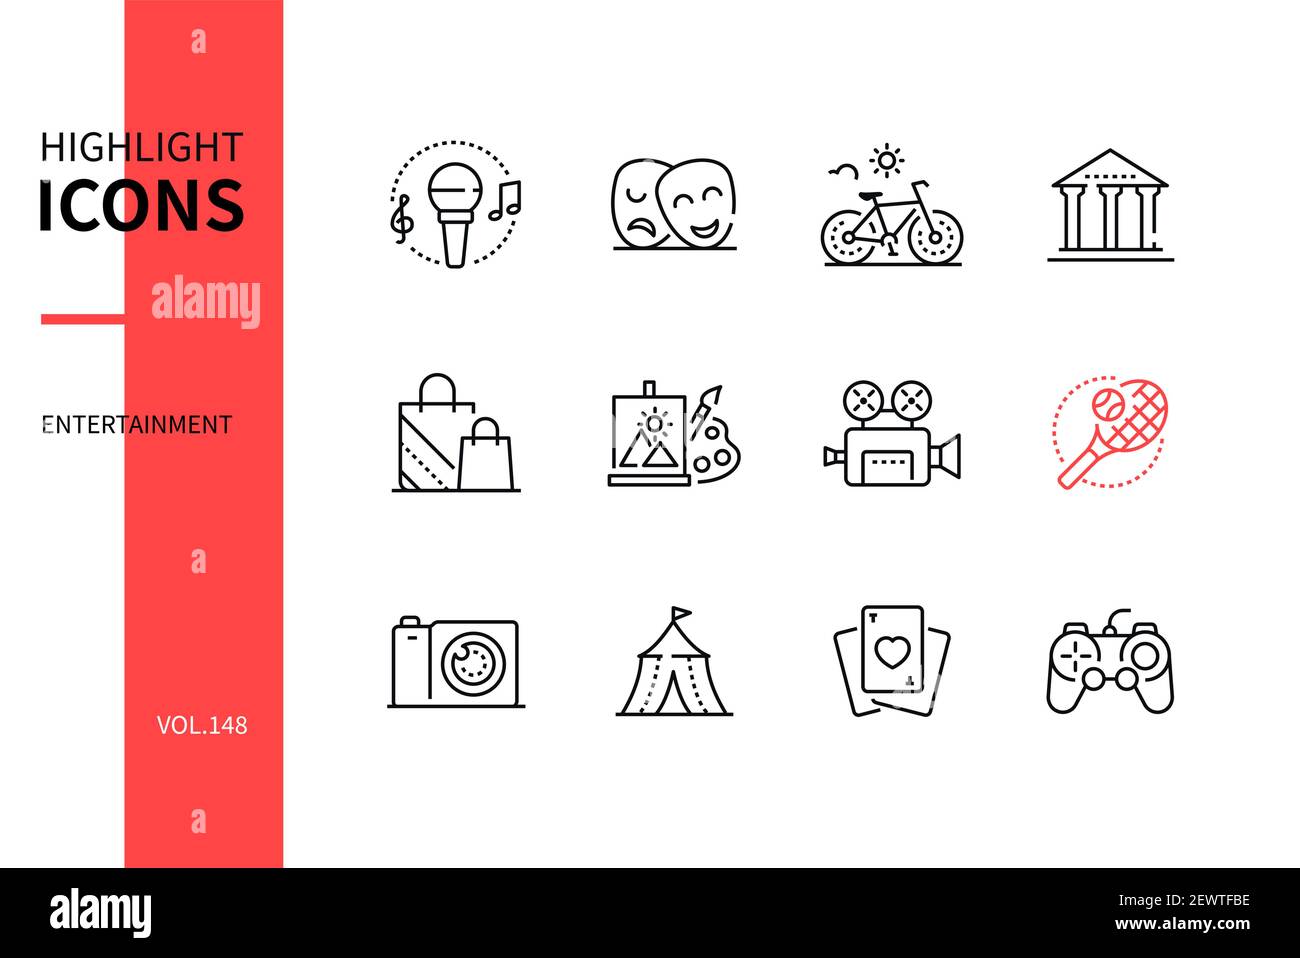 Entertainment - modern line design style icons set. Leisure and hobby concept. Music, theater, bicycle, museum, shopping, painting, cinema, sport, pho Stock Vector